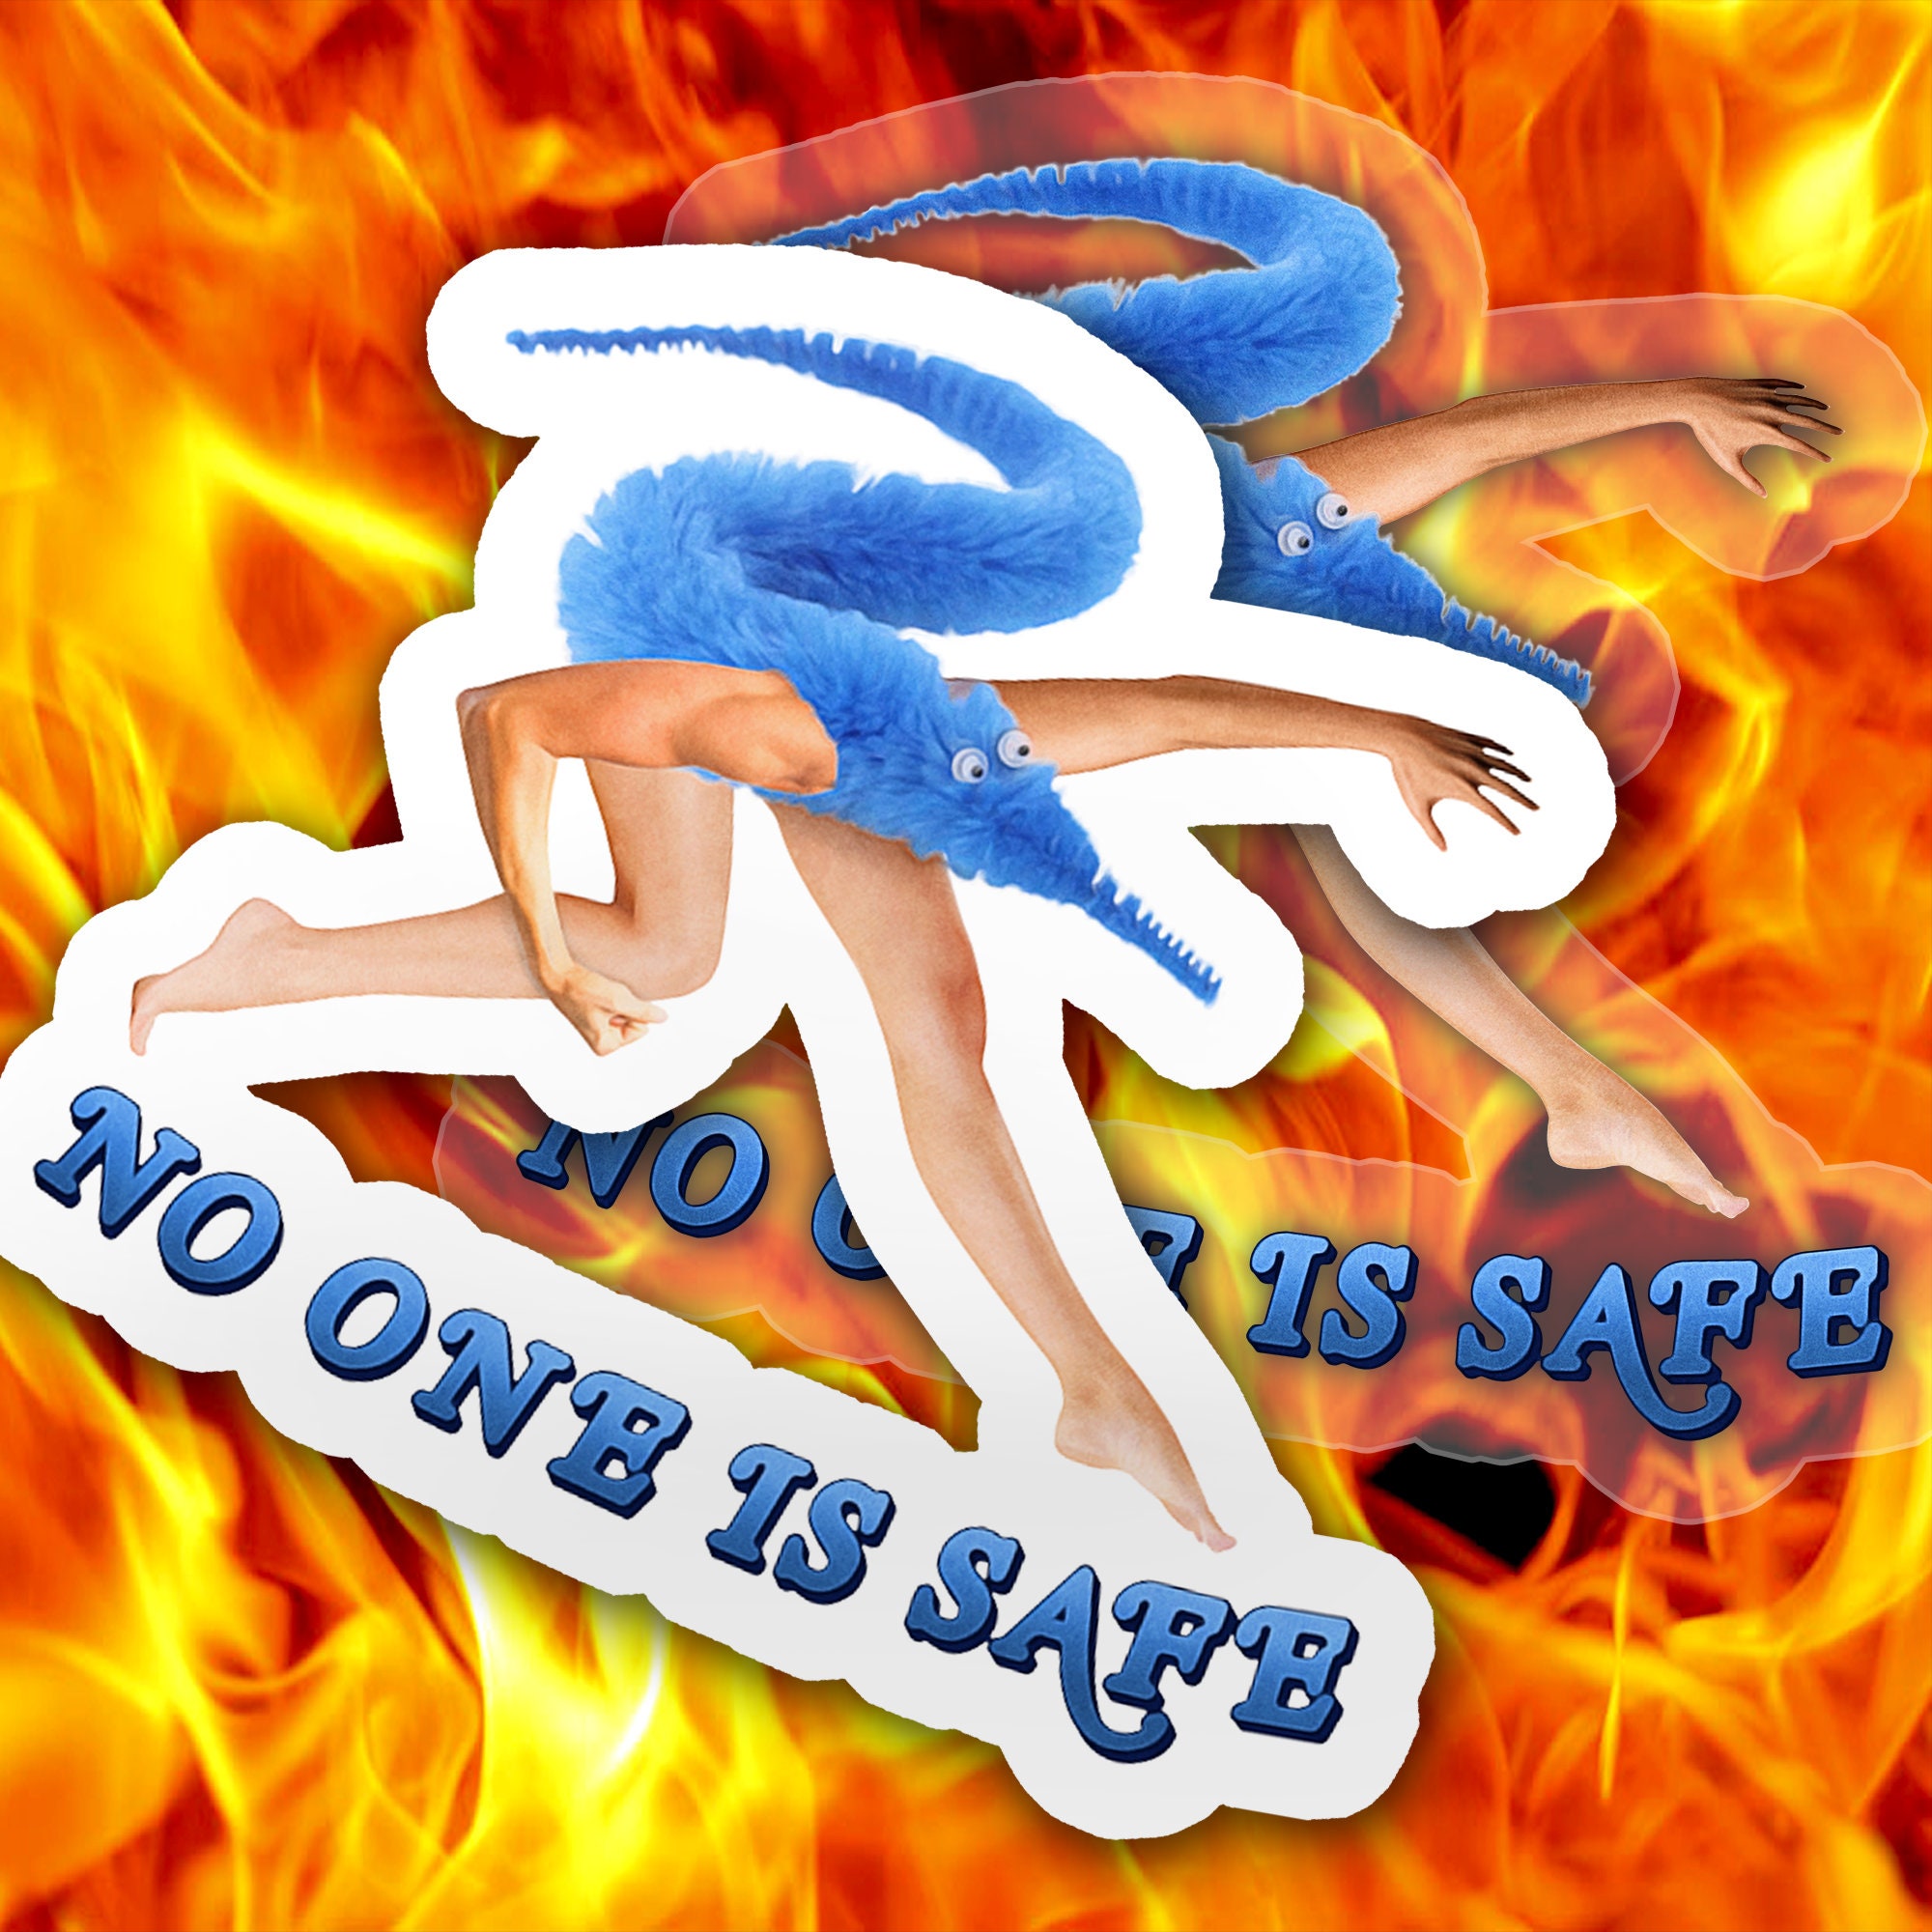 Worm on a String Cursed Sticker No One is Safe Blue Four Sizes, Transparent  or White 